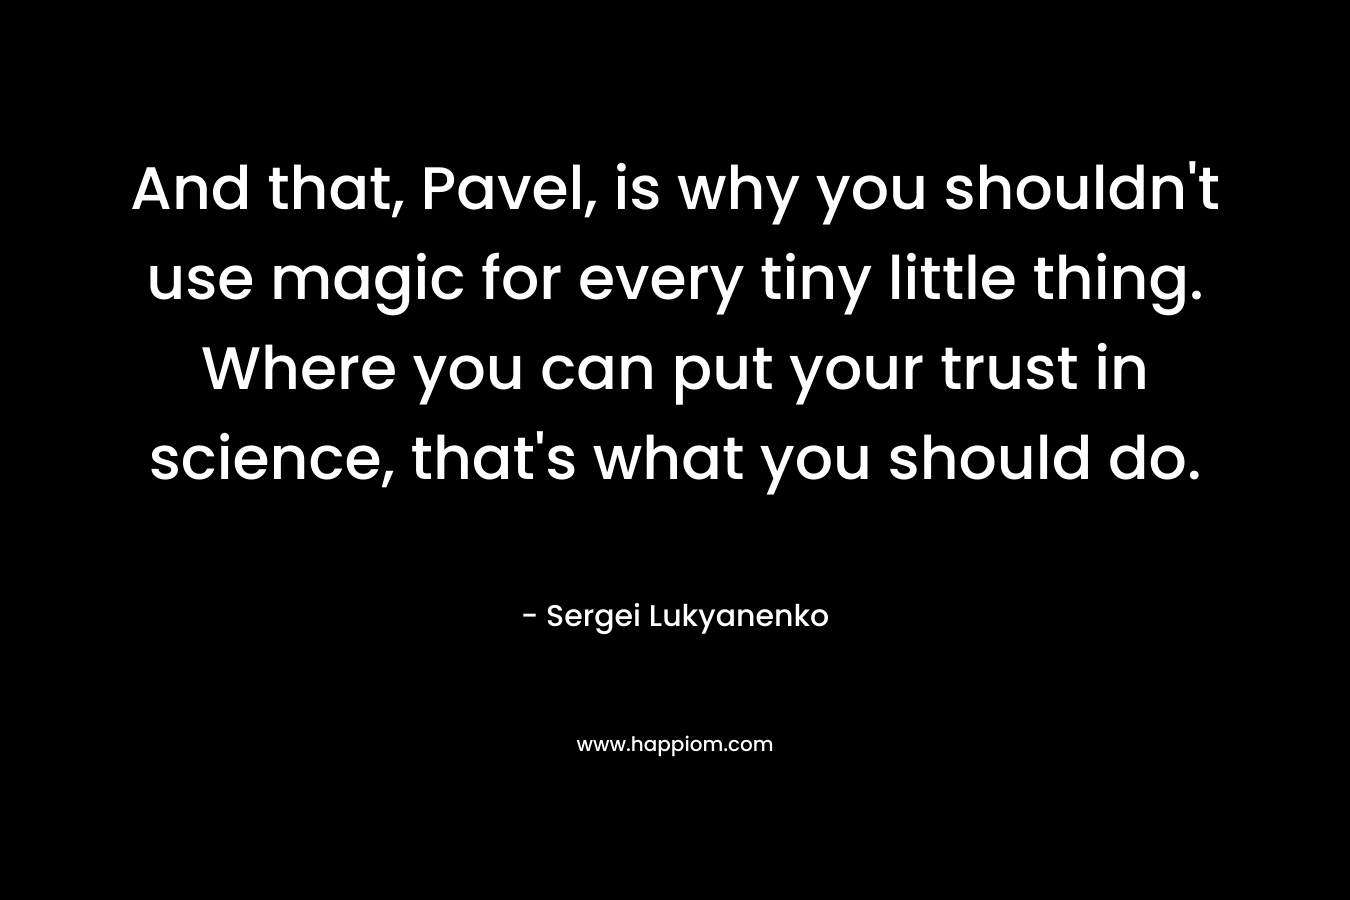 And that, Pavel, is why you shouldn't use magic for every tiny little thing. Where you can put your trust in science, that's what you should do.